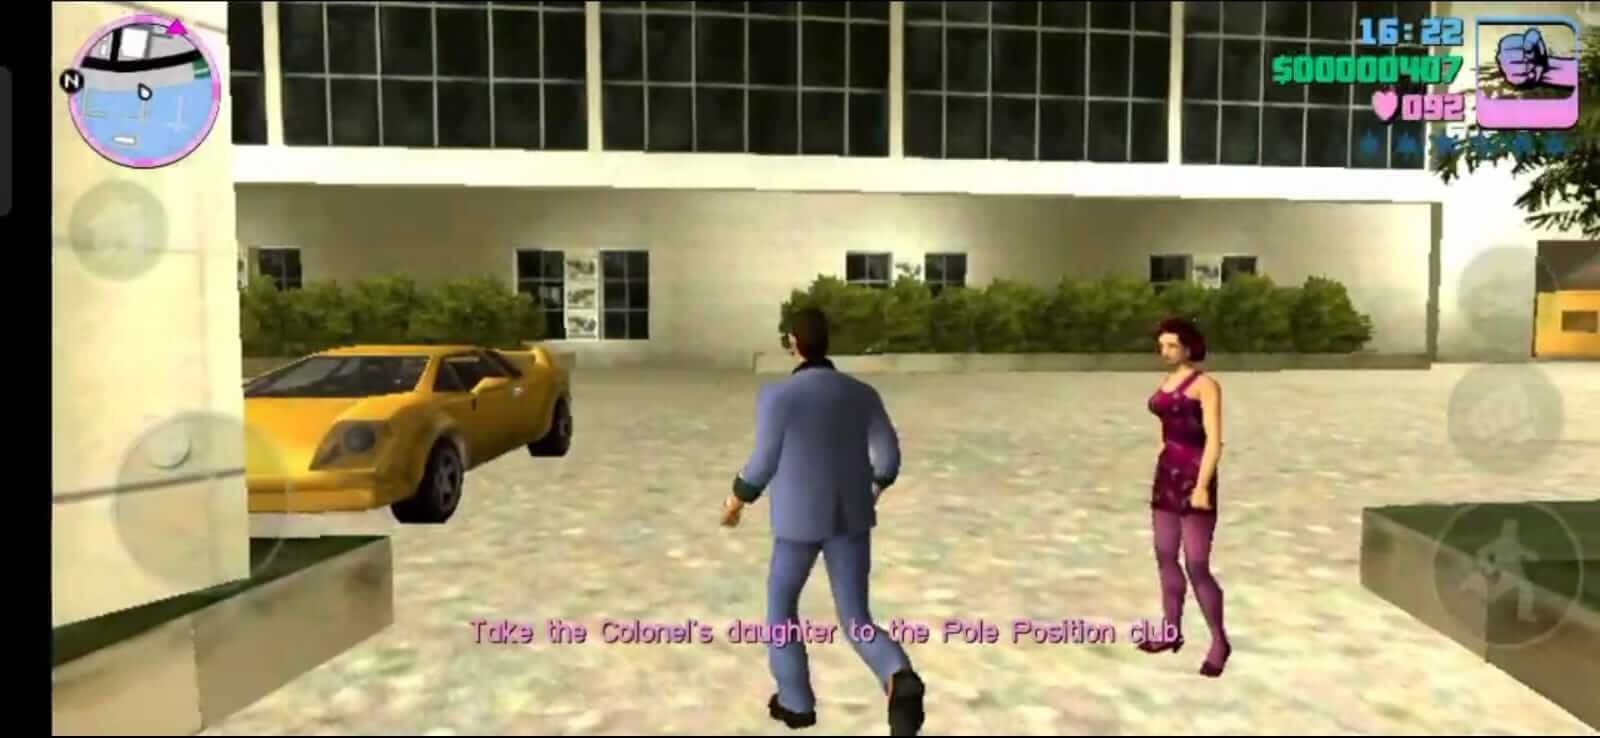 Download GTA Vice City Apk + MOD + OBB For Android v1.12